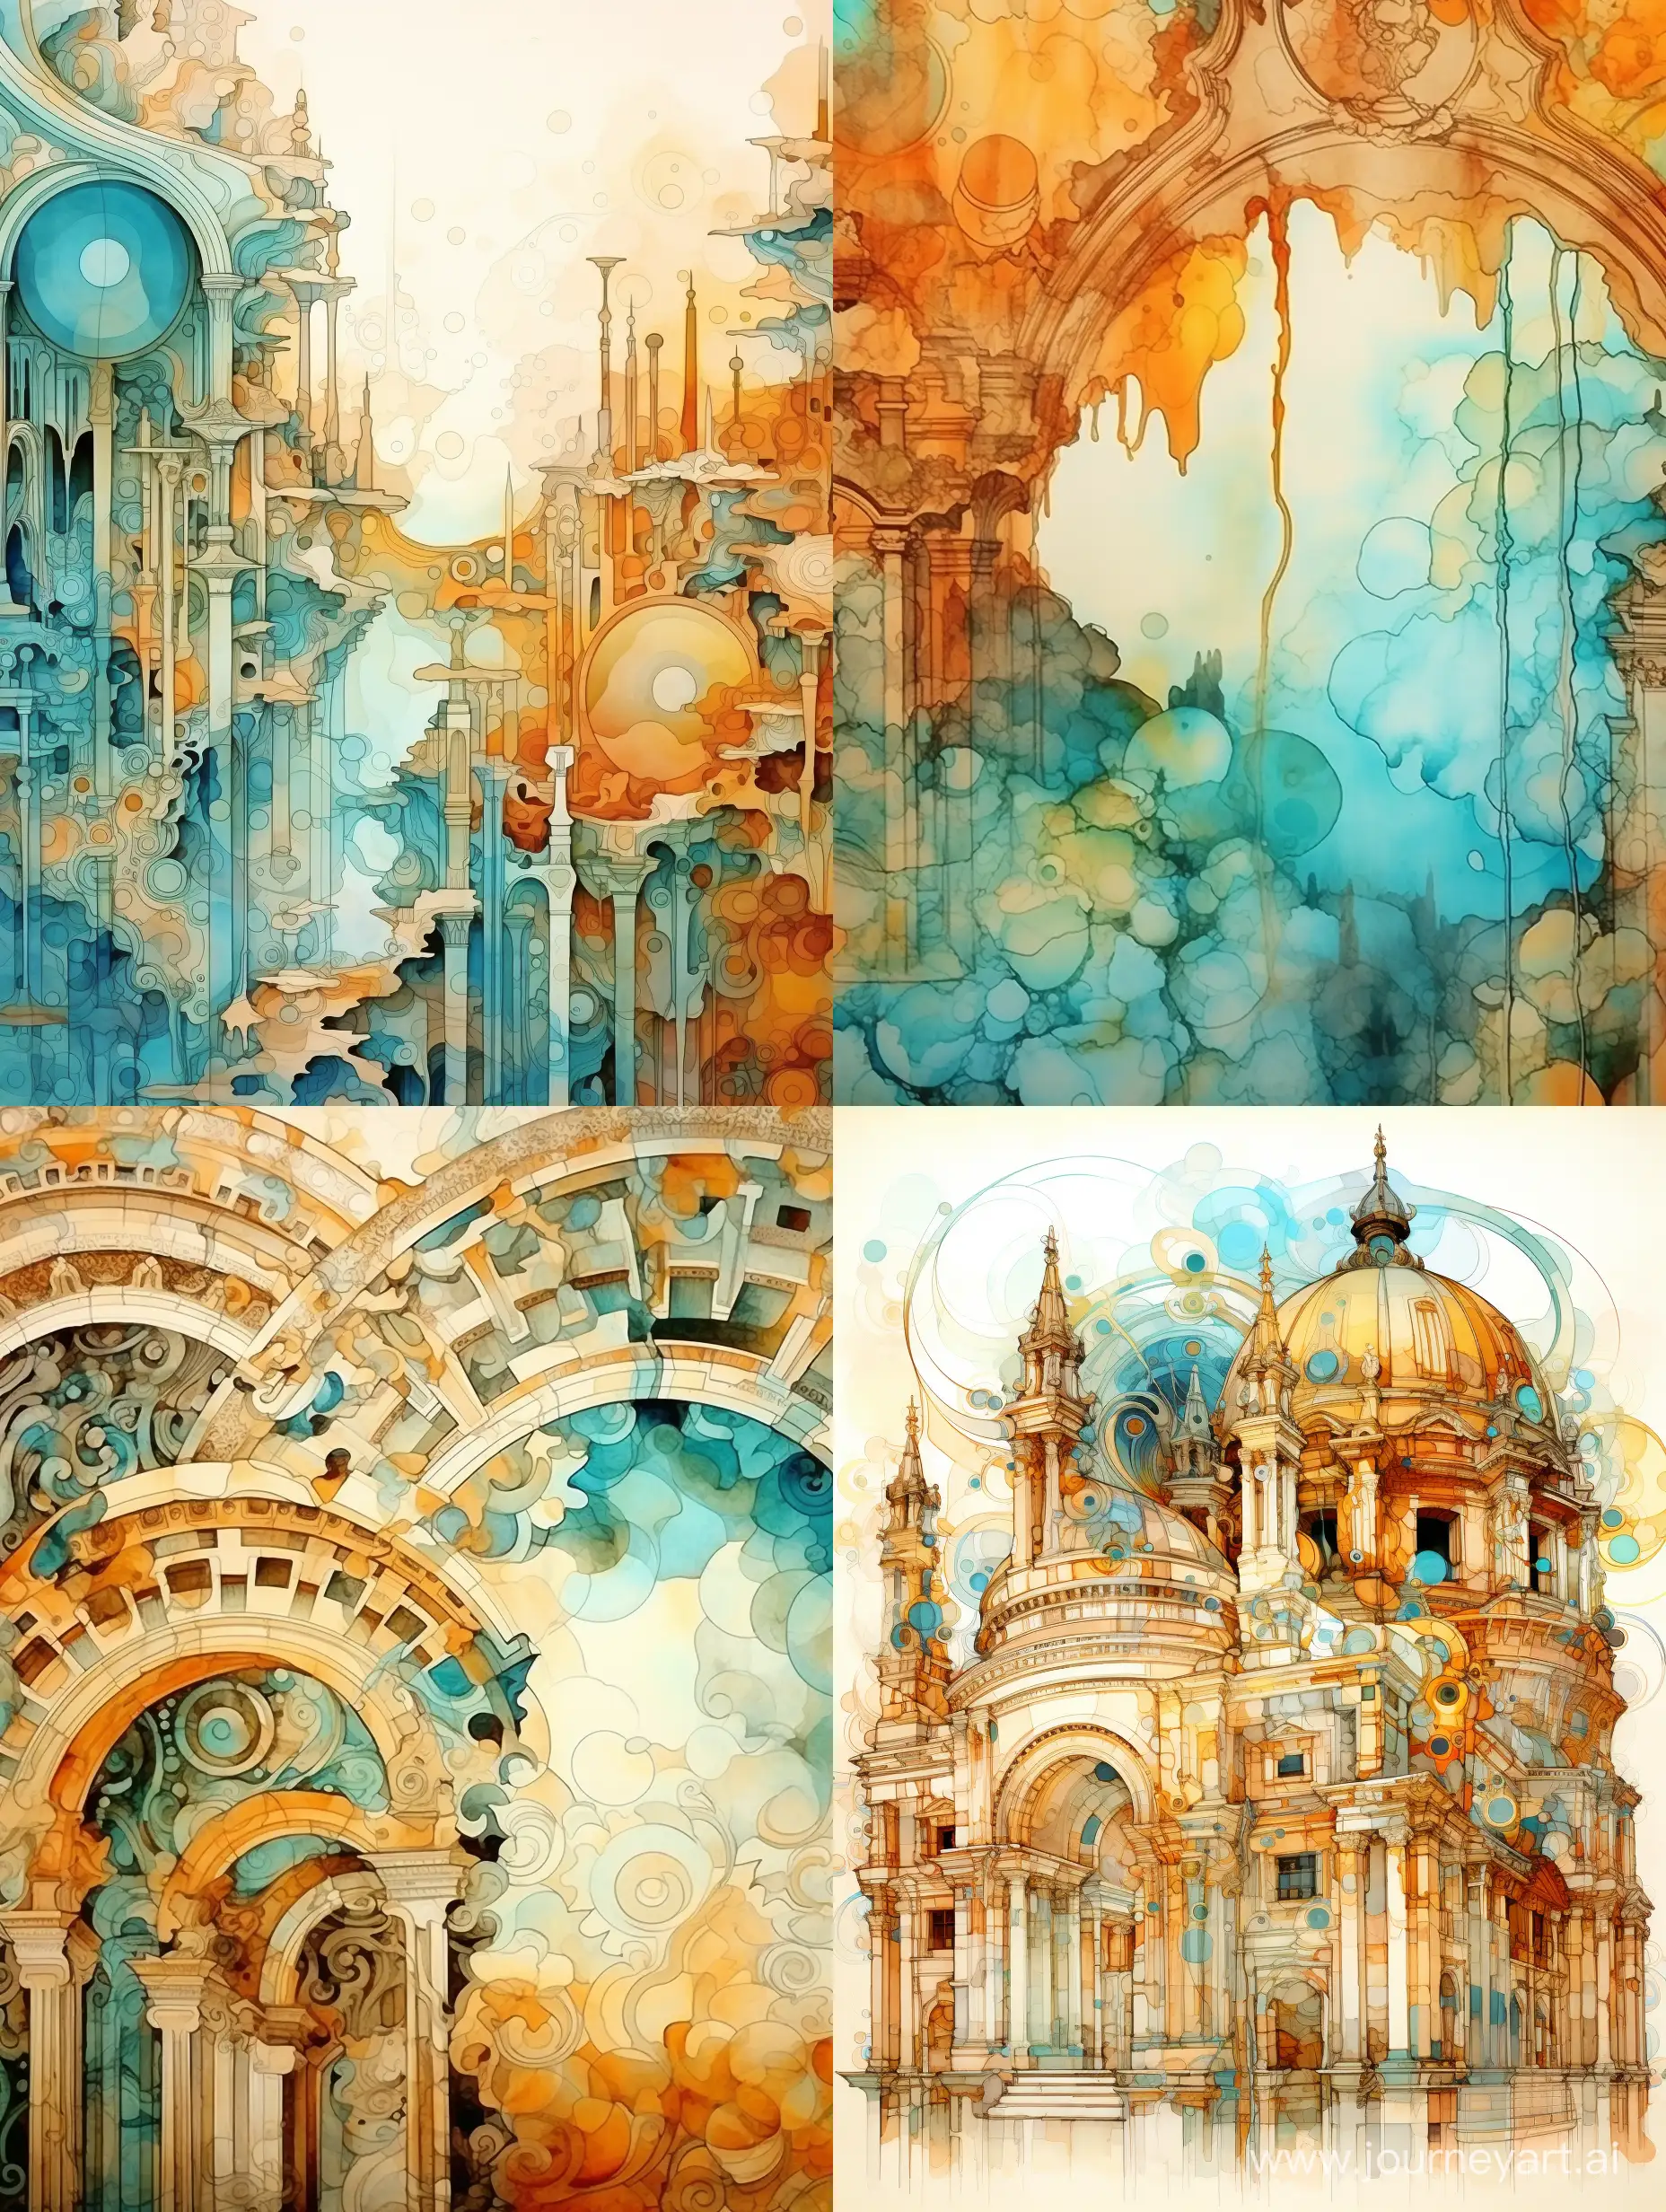 Ancient-Roman-City-Architectural-Features-in-Translucent-Watercolor-Style